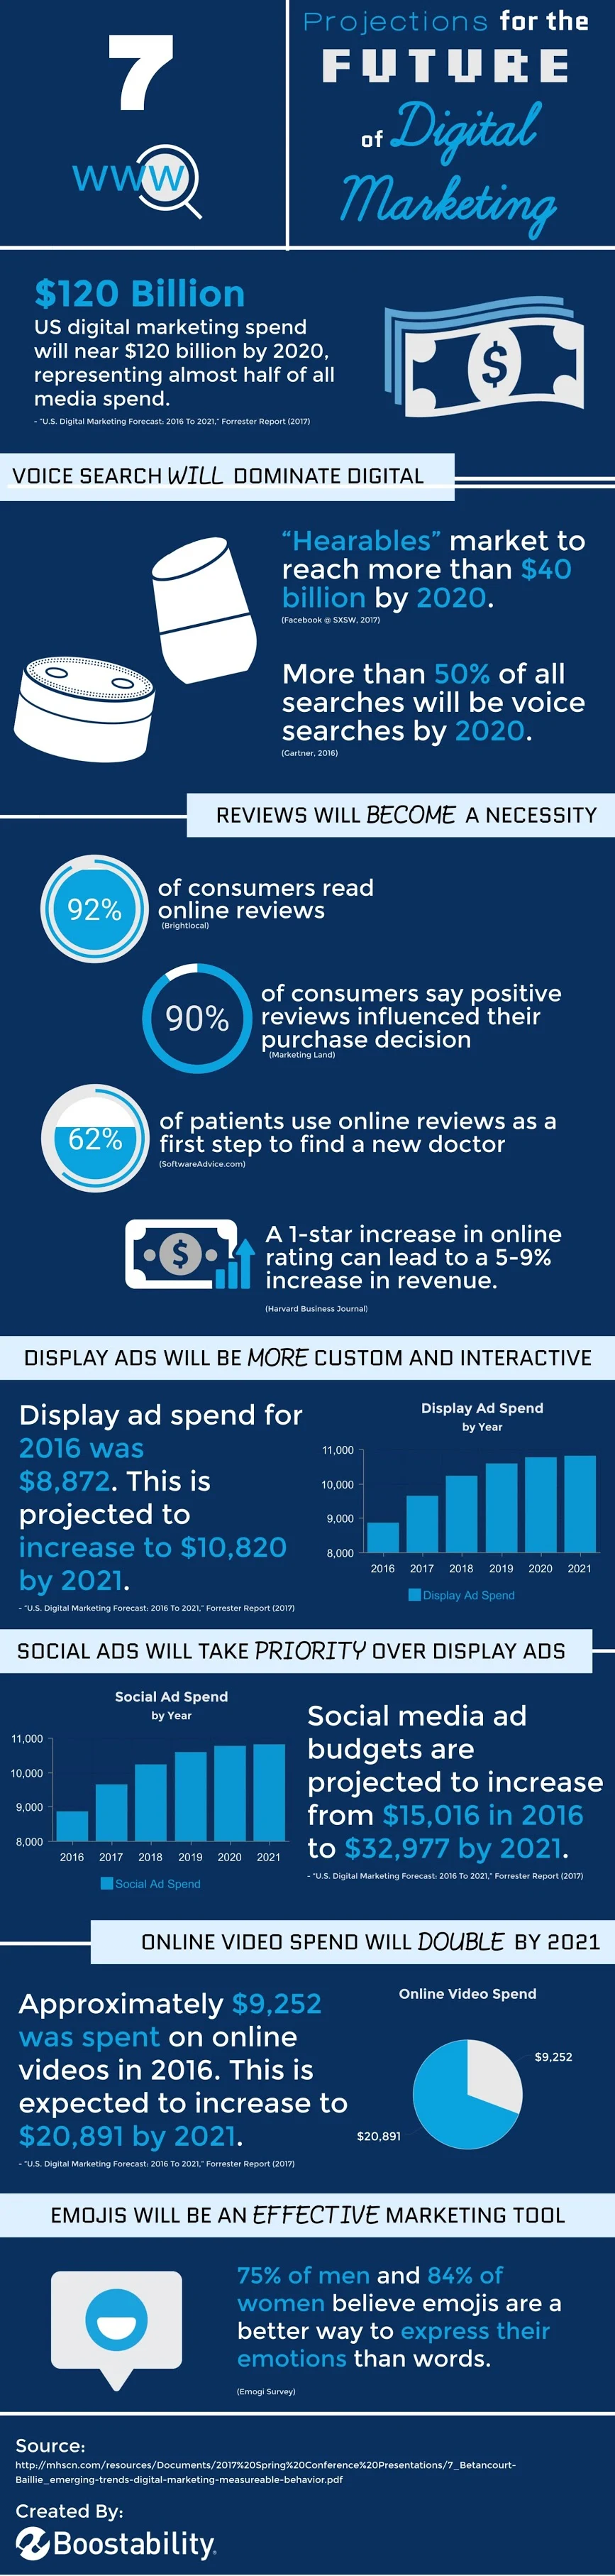 7 Projections for the Future of Digital Marketing - #Infographic